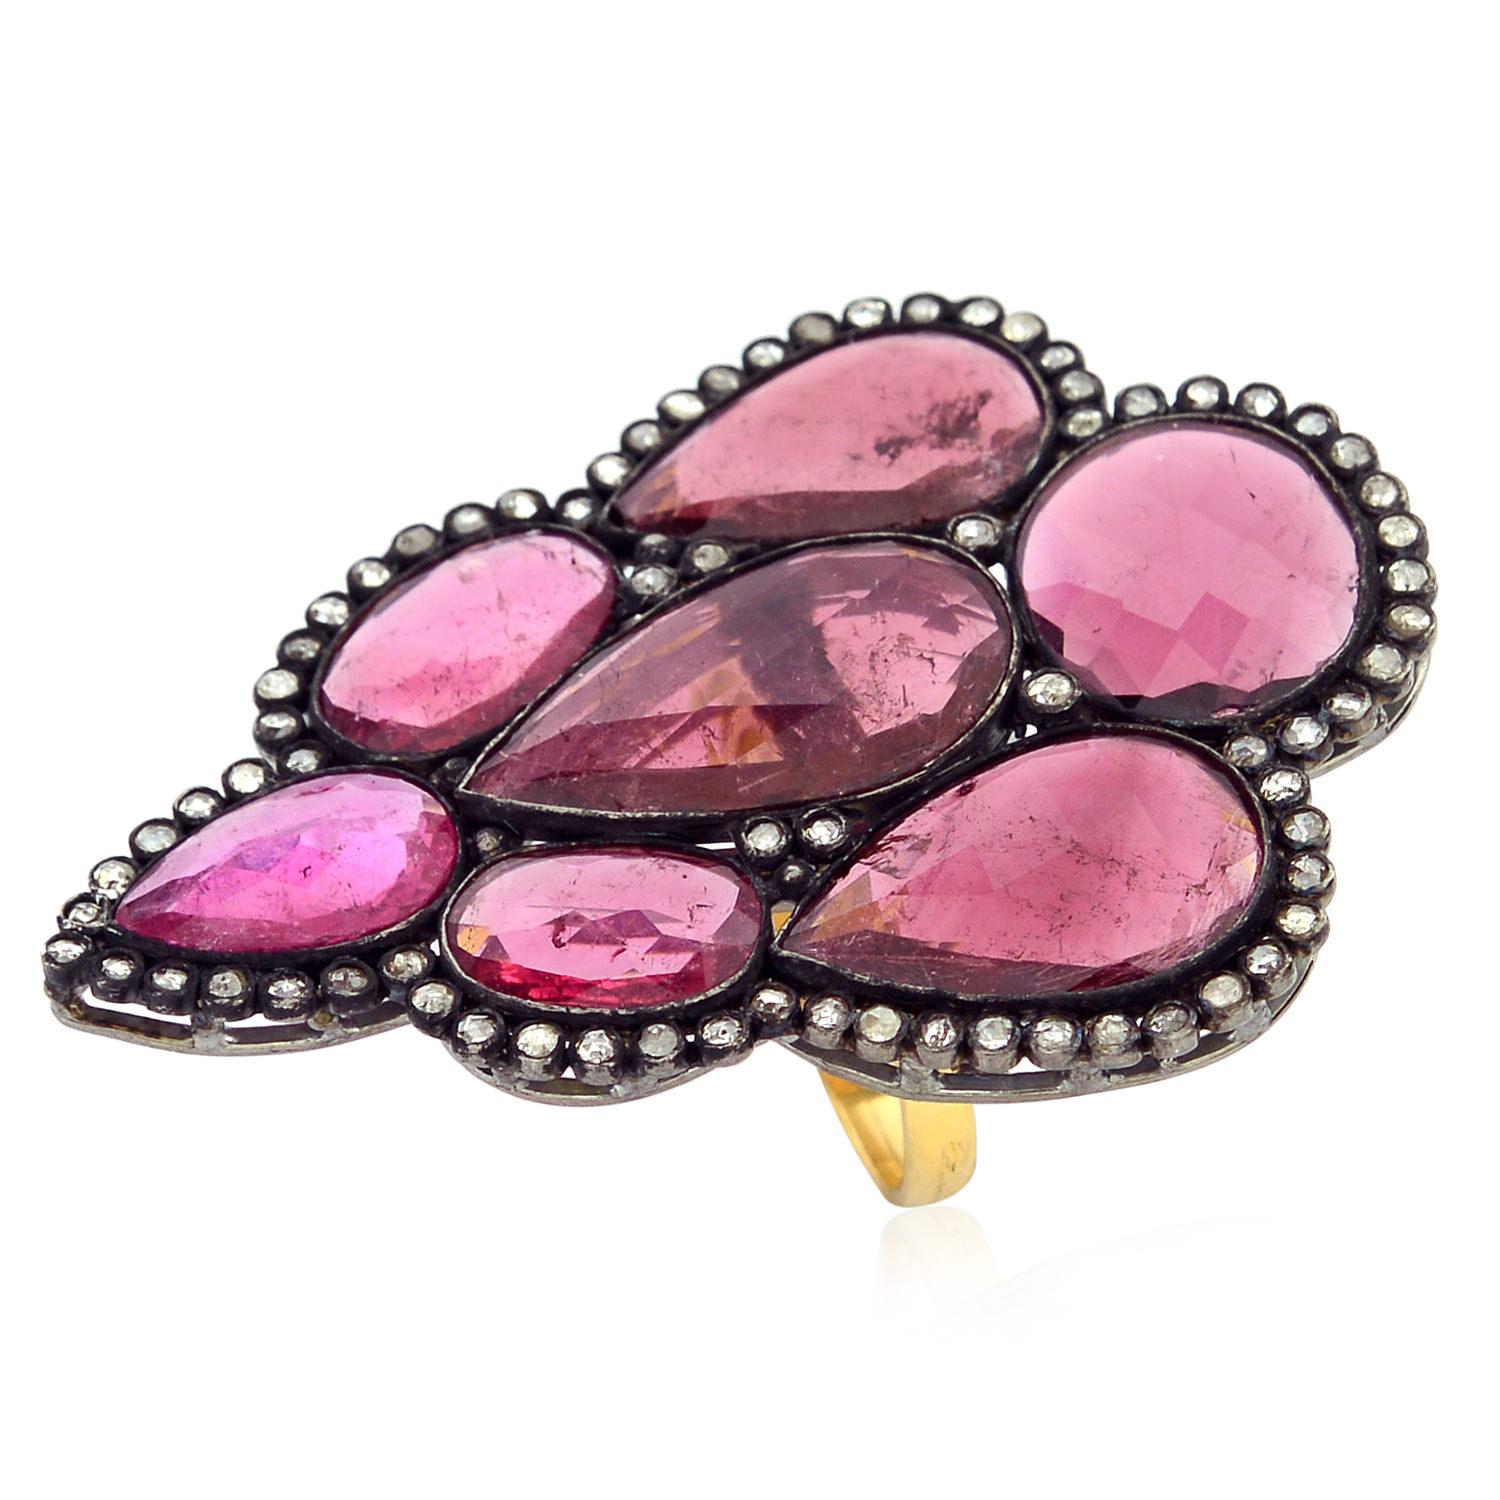 Contemporary 15.17ct Multishaped Pink Tourmaline Ring WIth Diamonds Made In 14k Gold & Silver For Sale